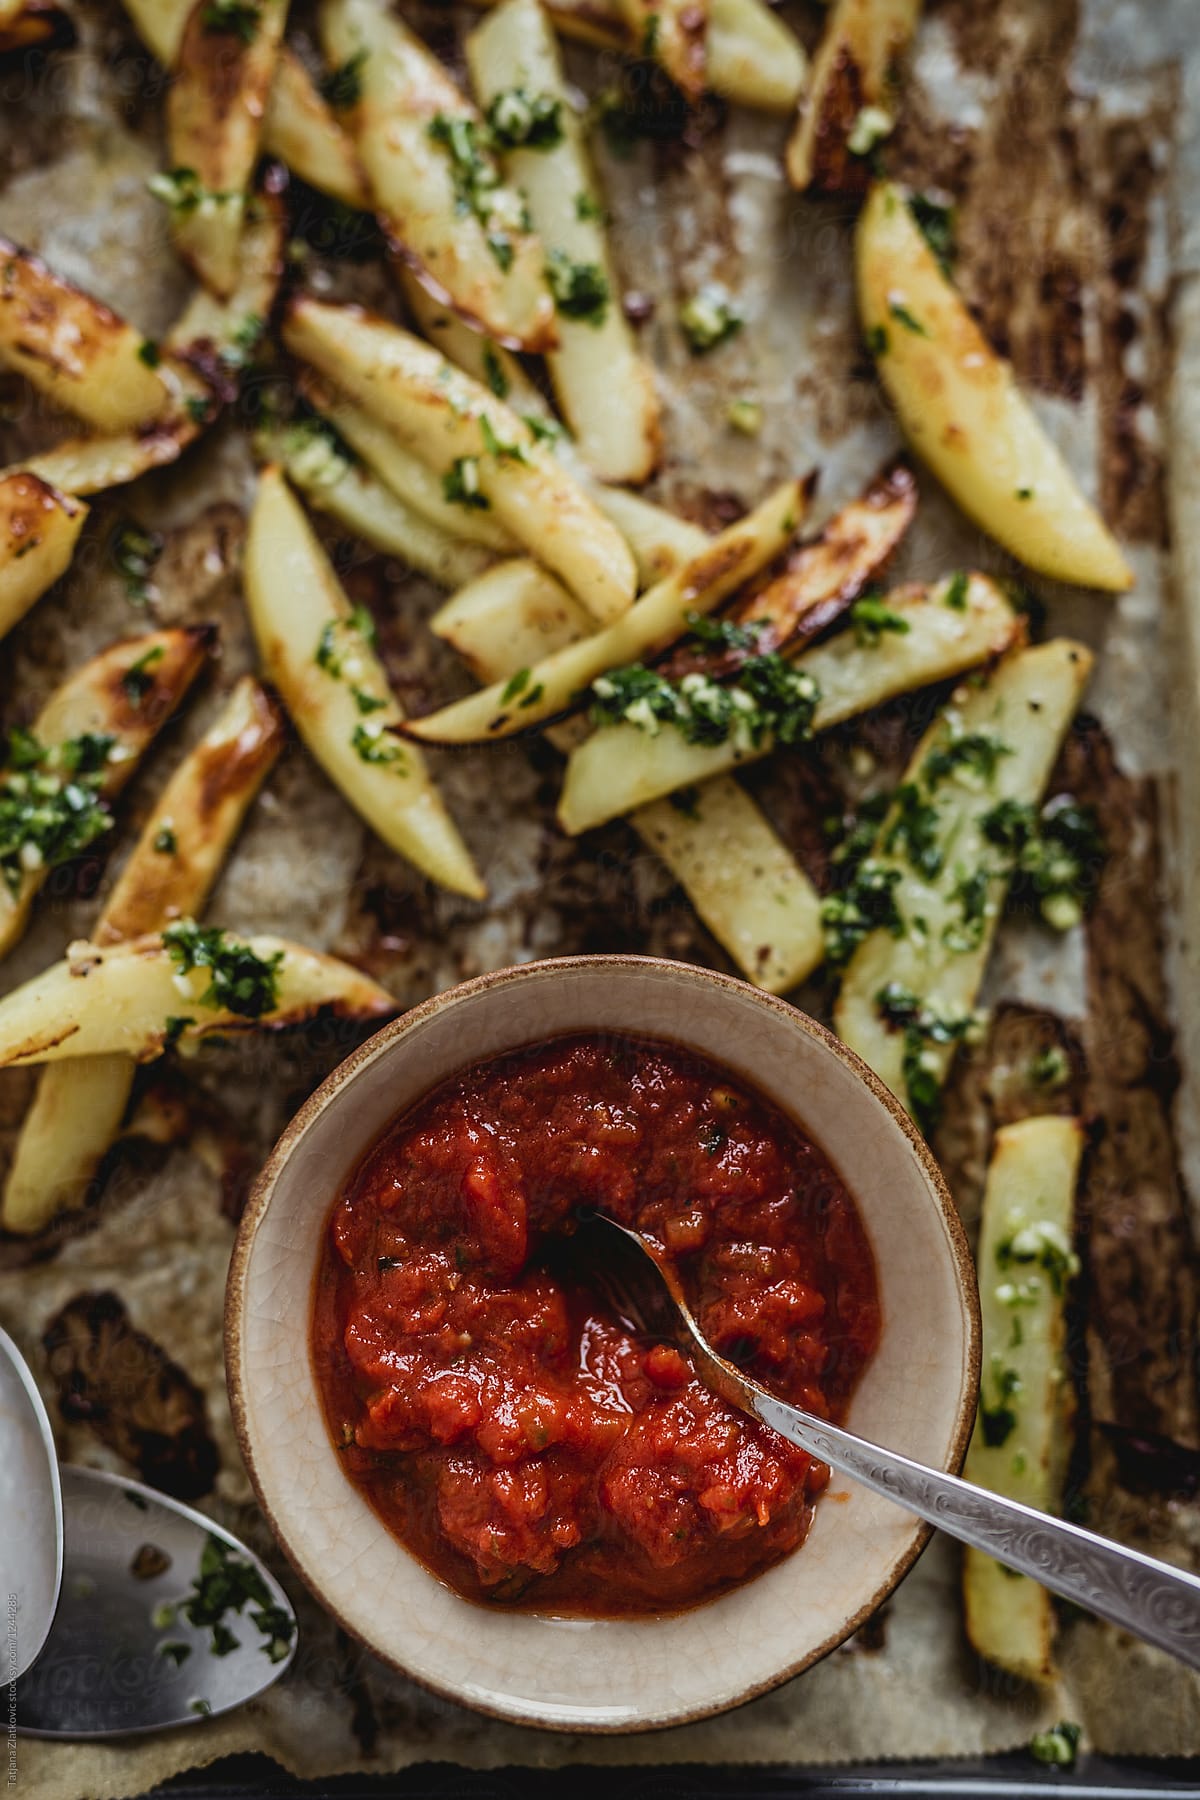 Roasted potatoes with tomato sauce